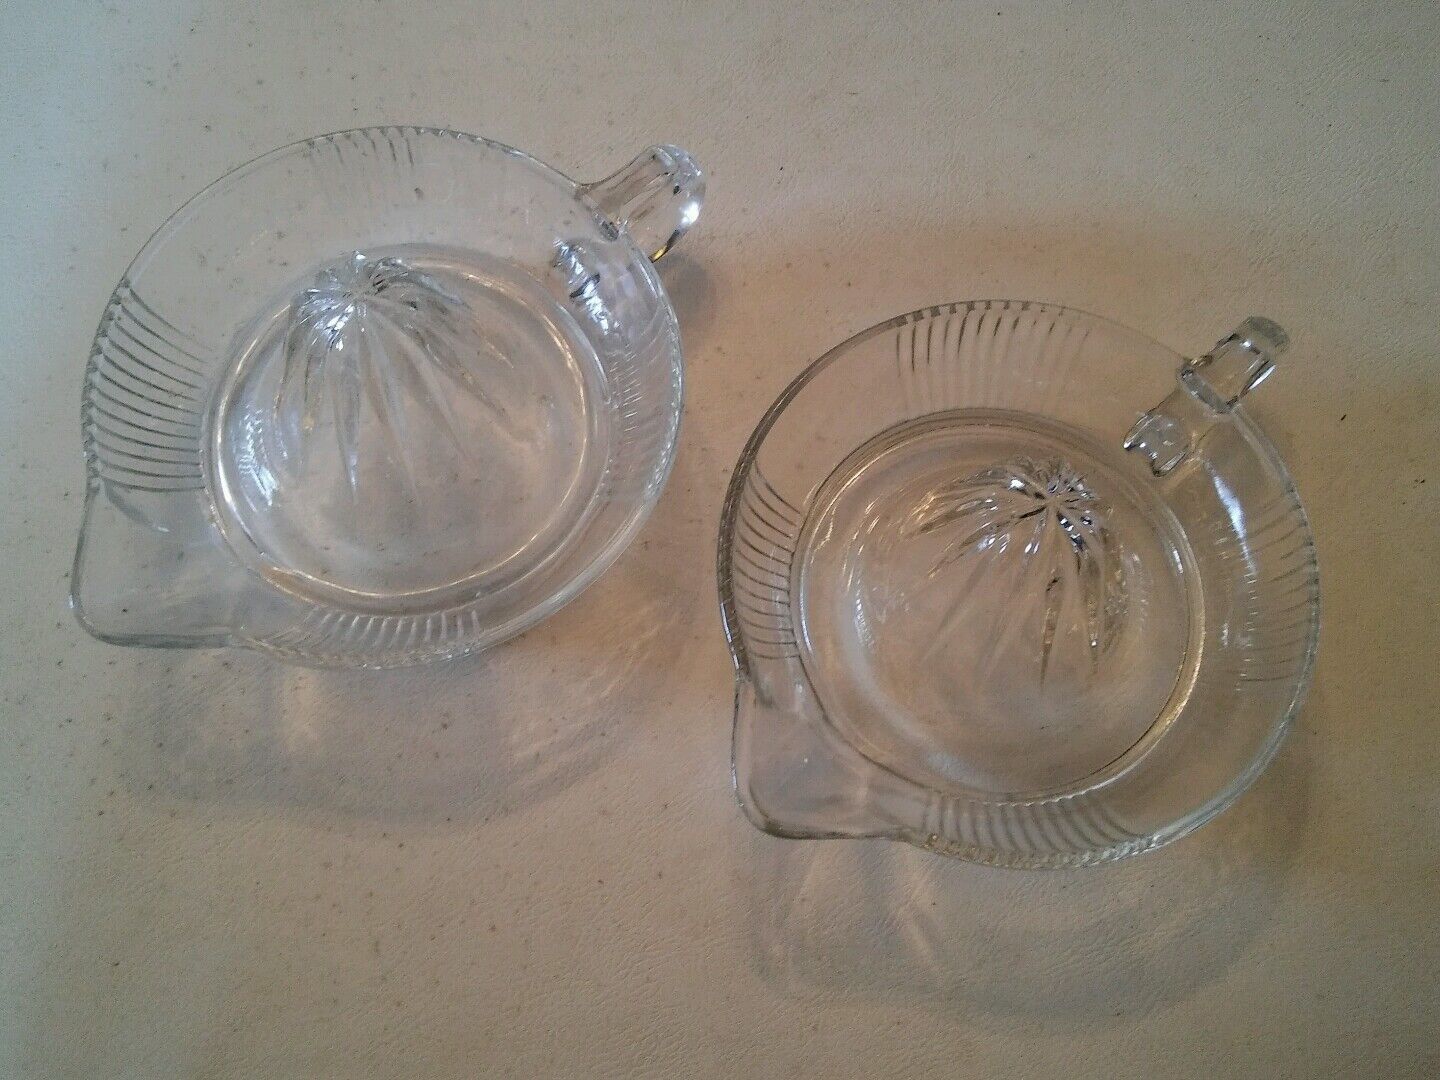 Primary image for 000 Pair - 2 Vintage Clear Glass Reamers Juicers